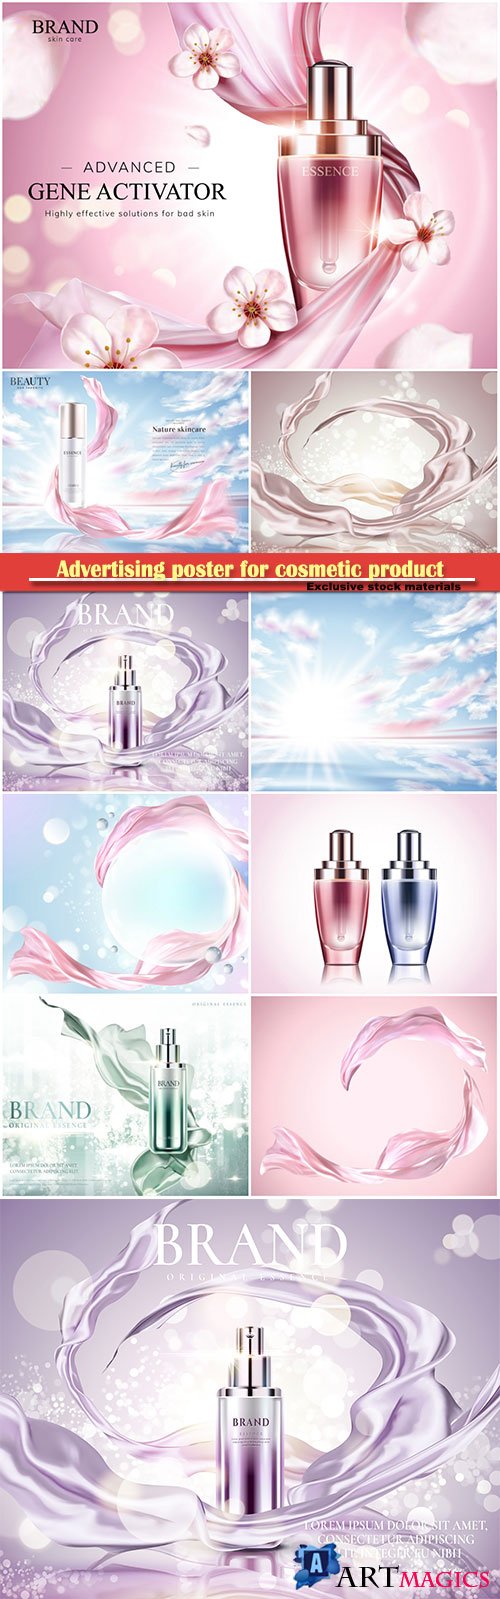 Advertising poster for cosmetic product, magazine, design of cosmetic package # 4